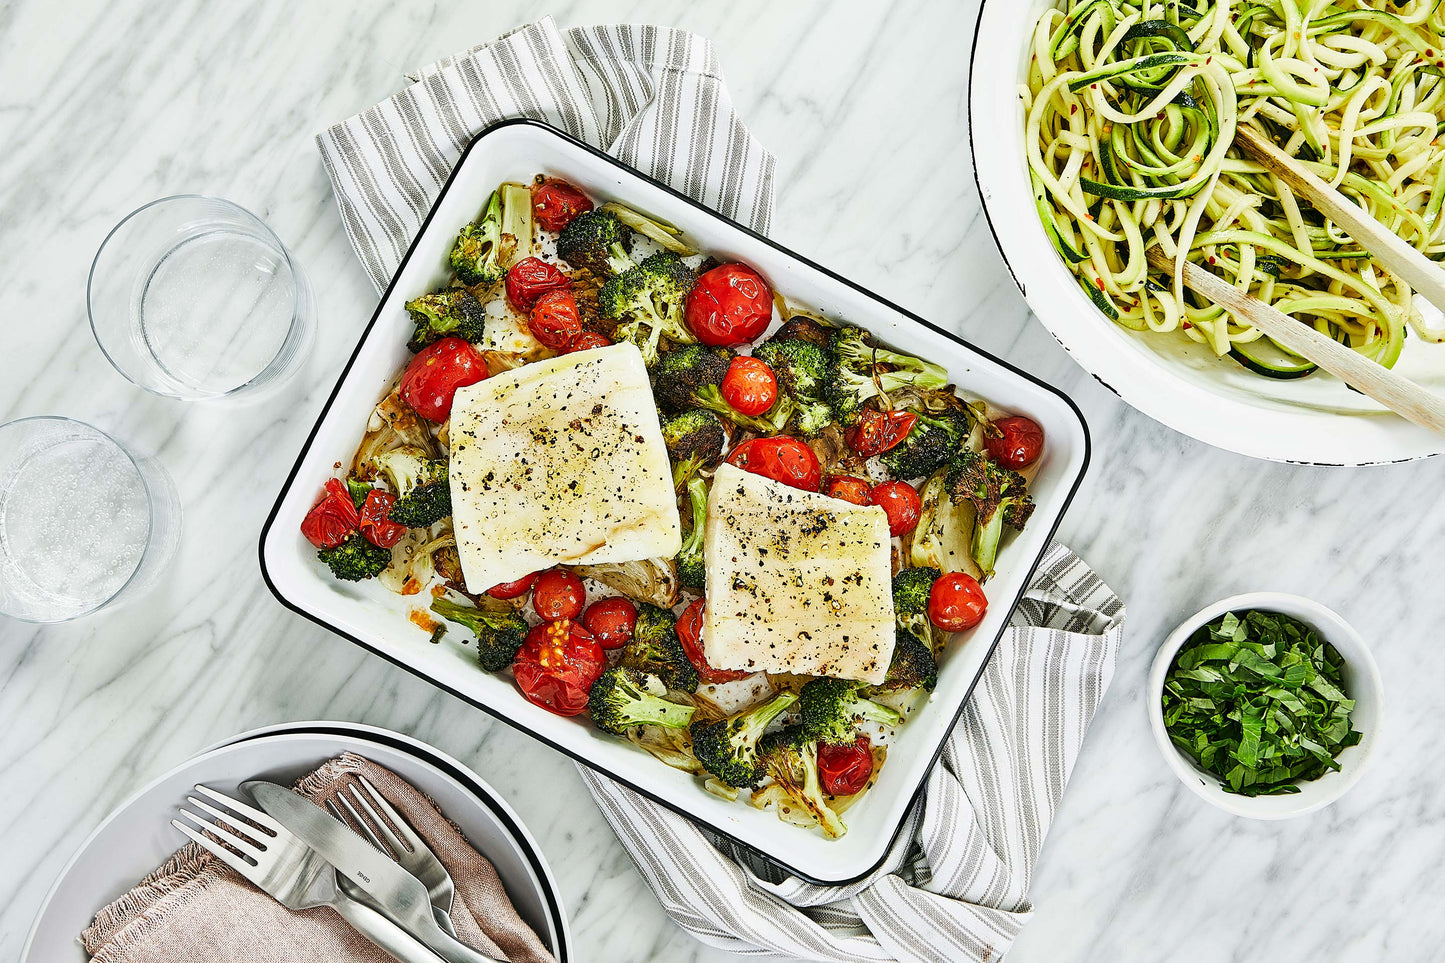 Oven-Baked Cod (or Halibut) with Zoodles